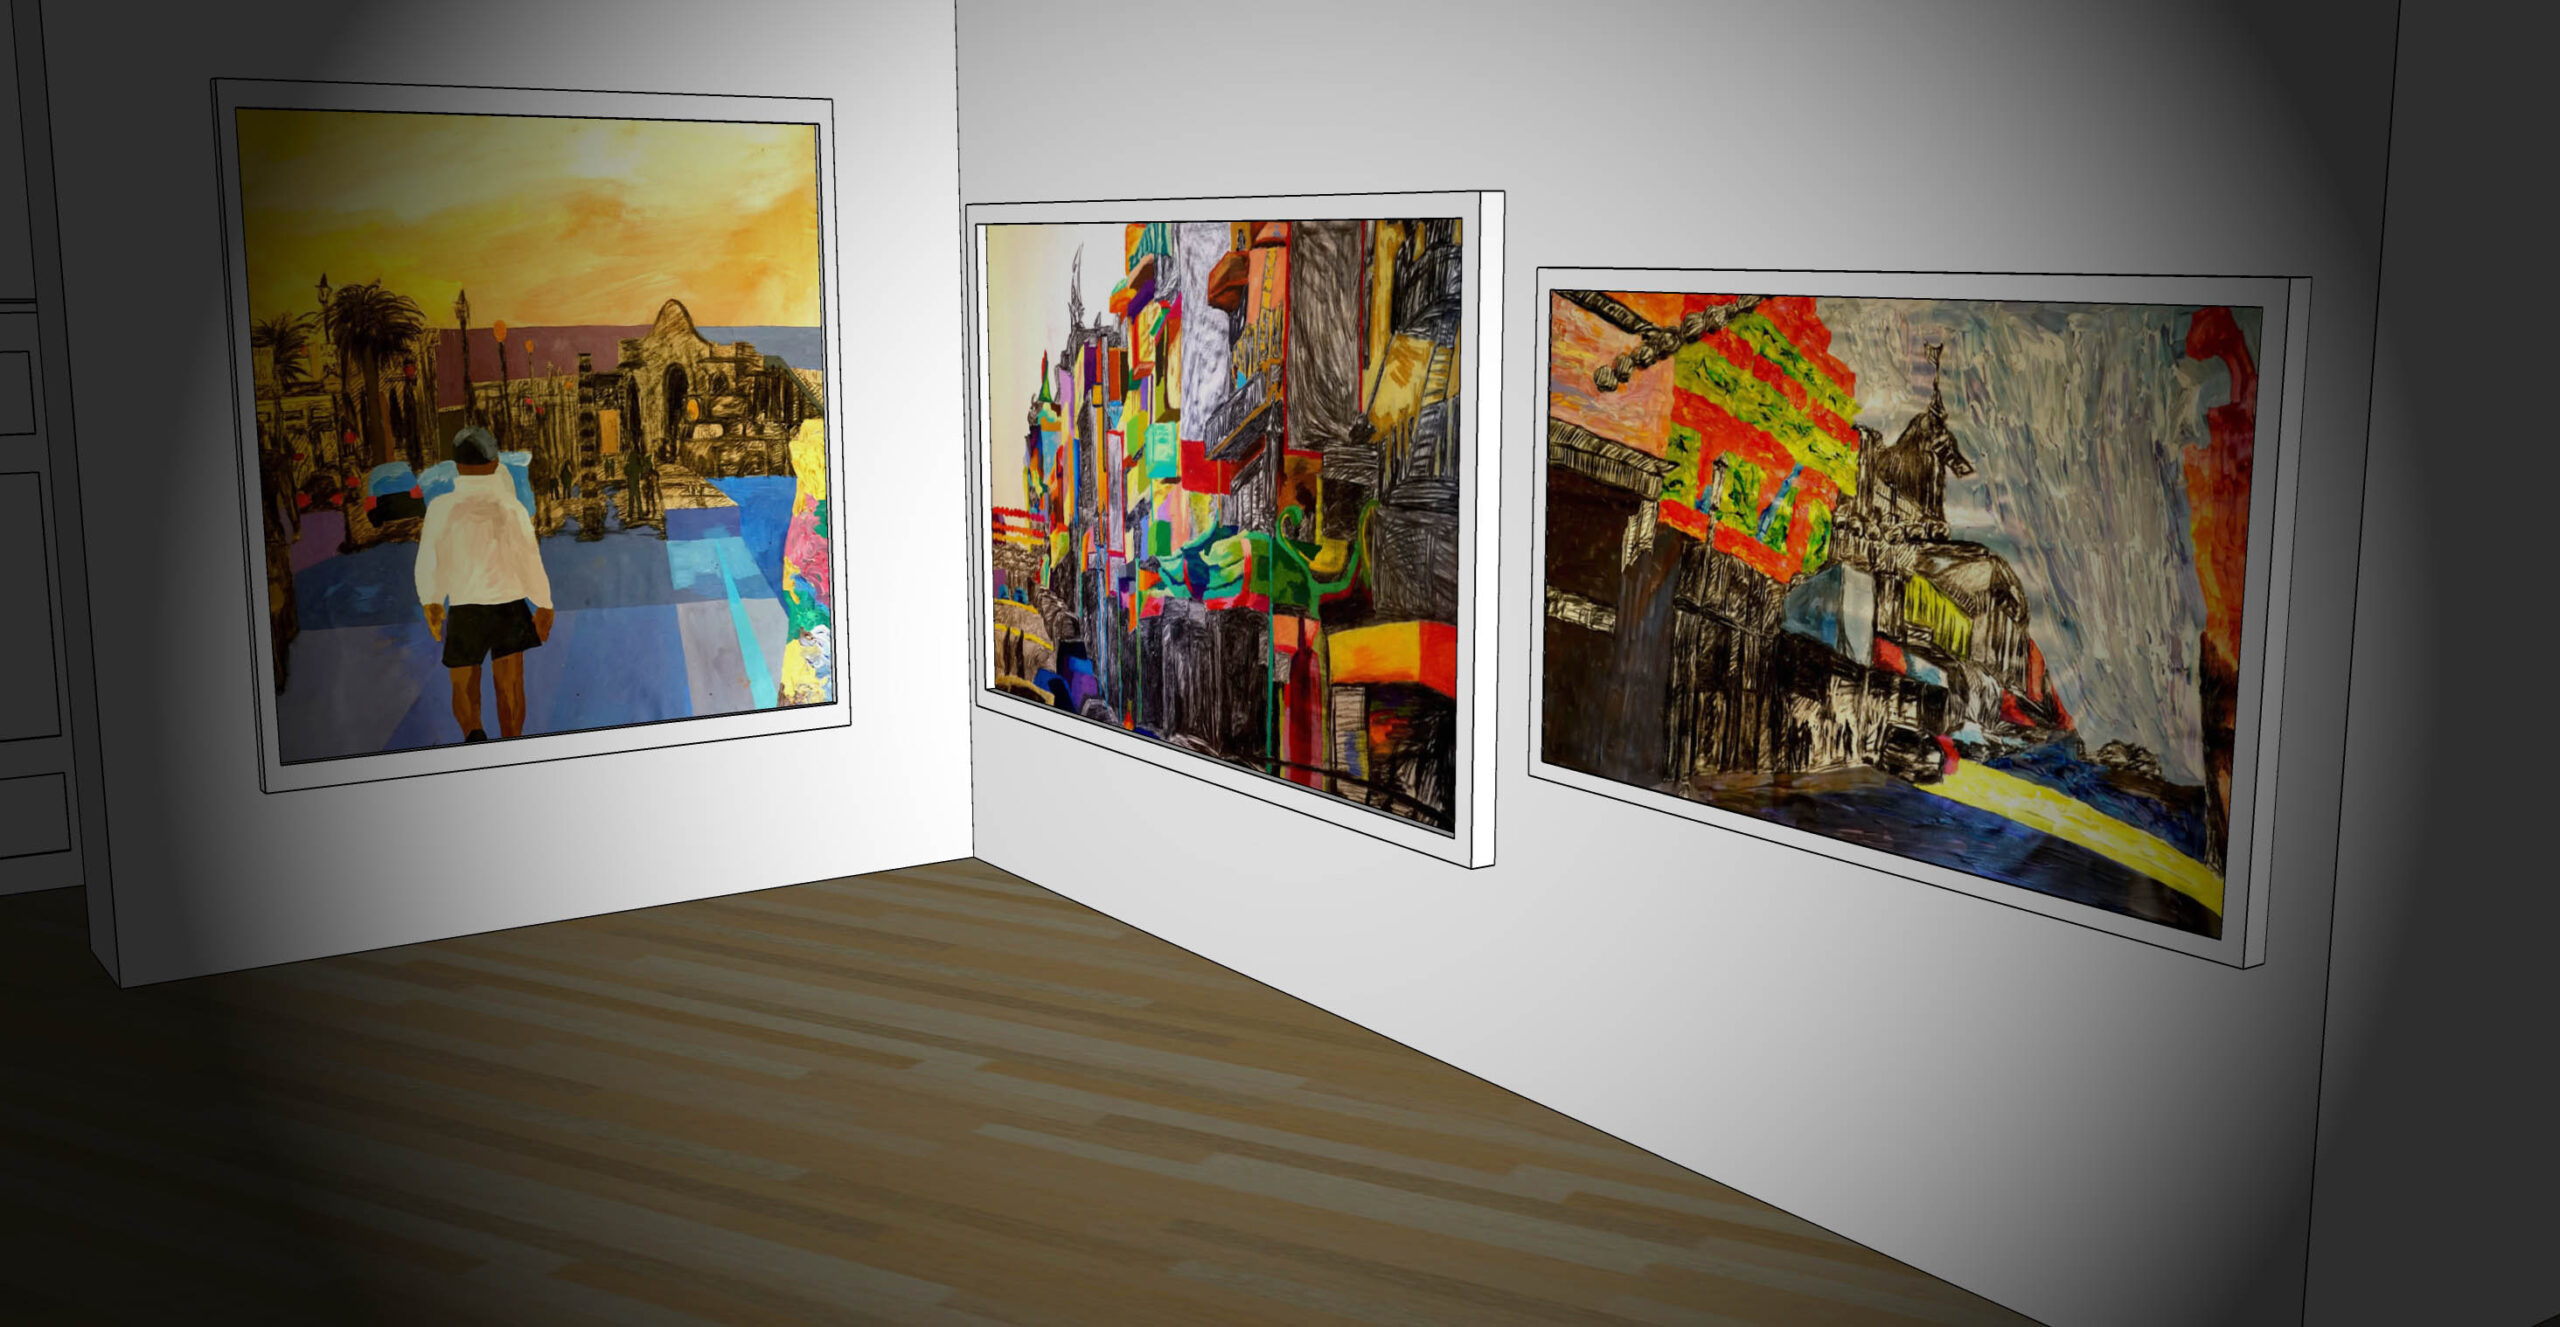 Installation view of three large paintings in the virtual gallery.